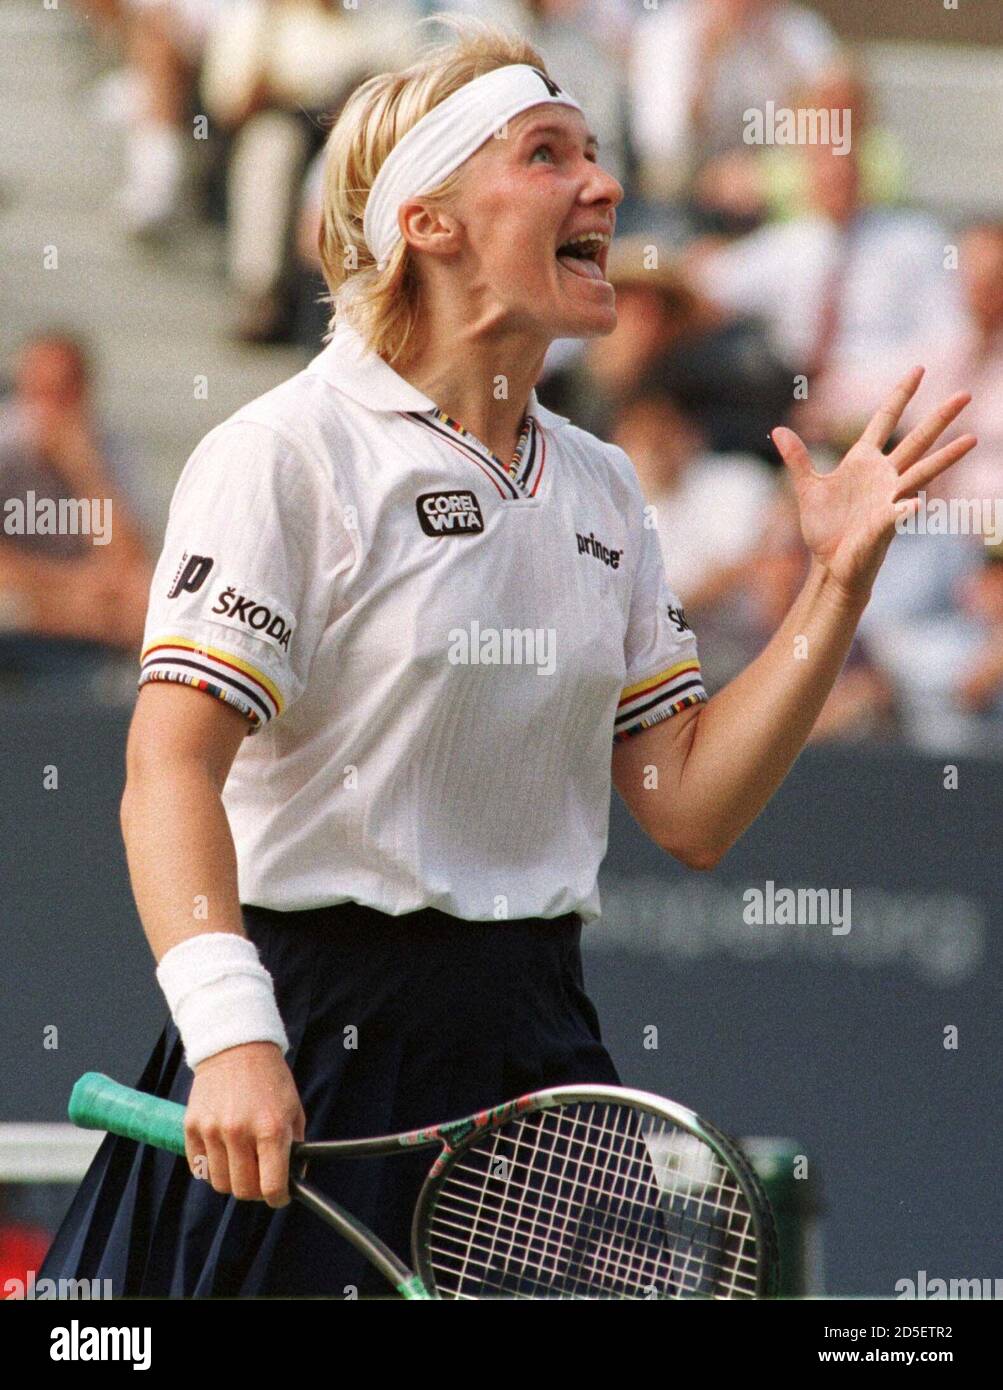 Jana Novotna of the Czech Republic screams after missing a point in the  final game against defending U.S. Open champion Martina Hingis of  Switzerland, during semi-final U.S. Open play at the USTA